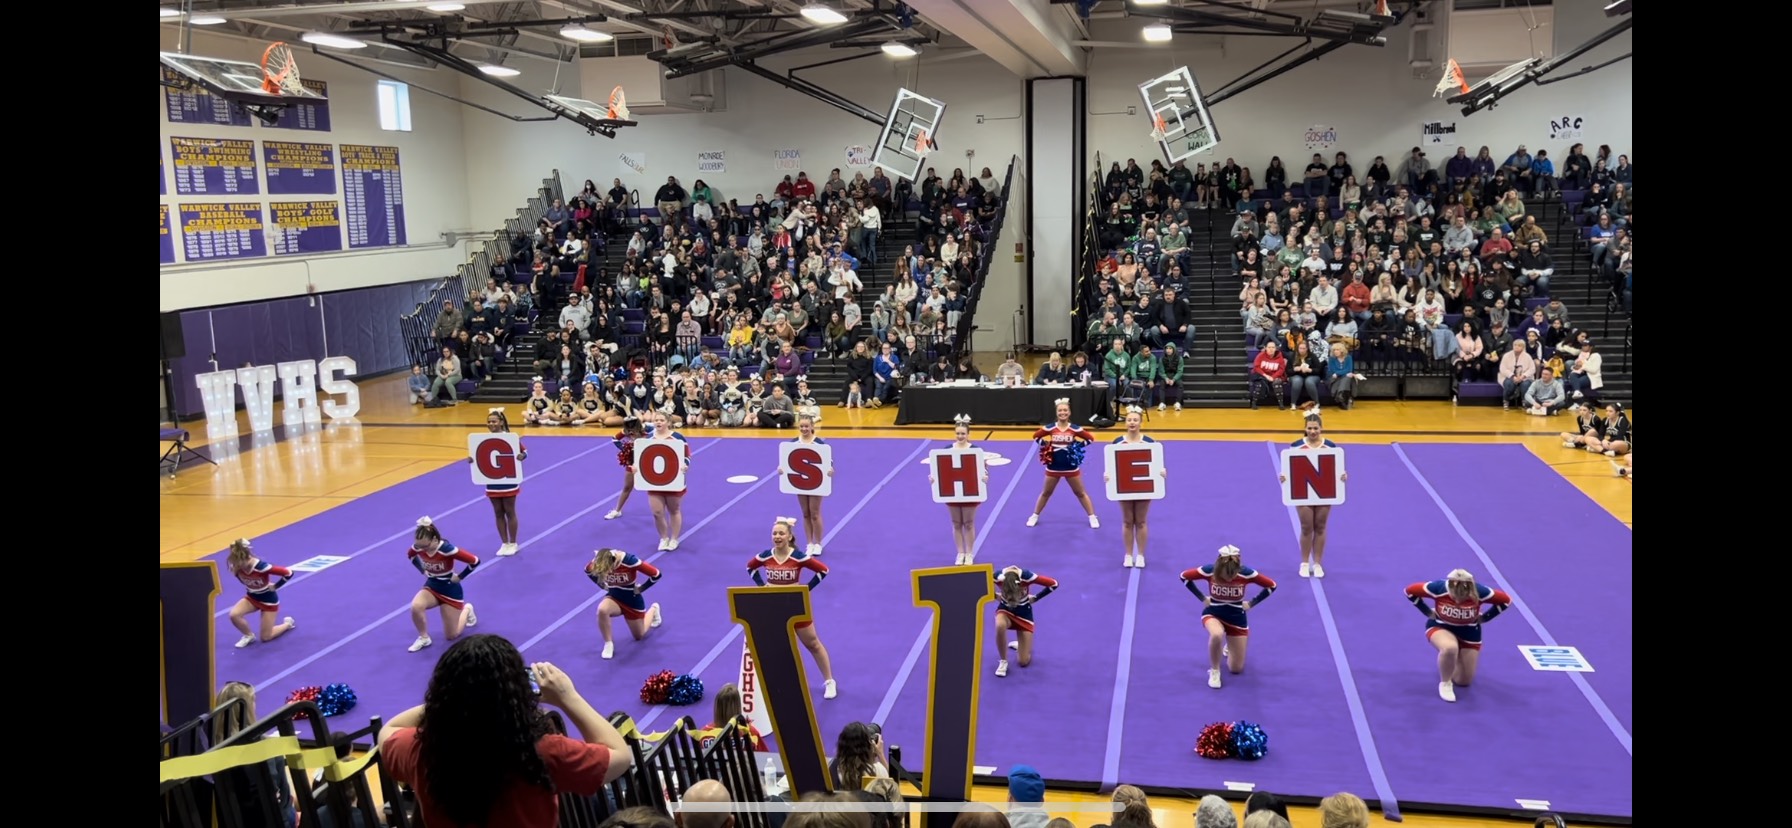 Cheerleaders hold up letters spelling out "Goshen" in a gym with a purple floor and crowded bleachers. 